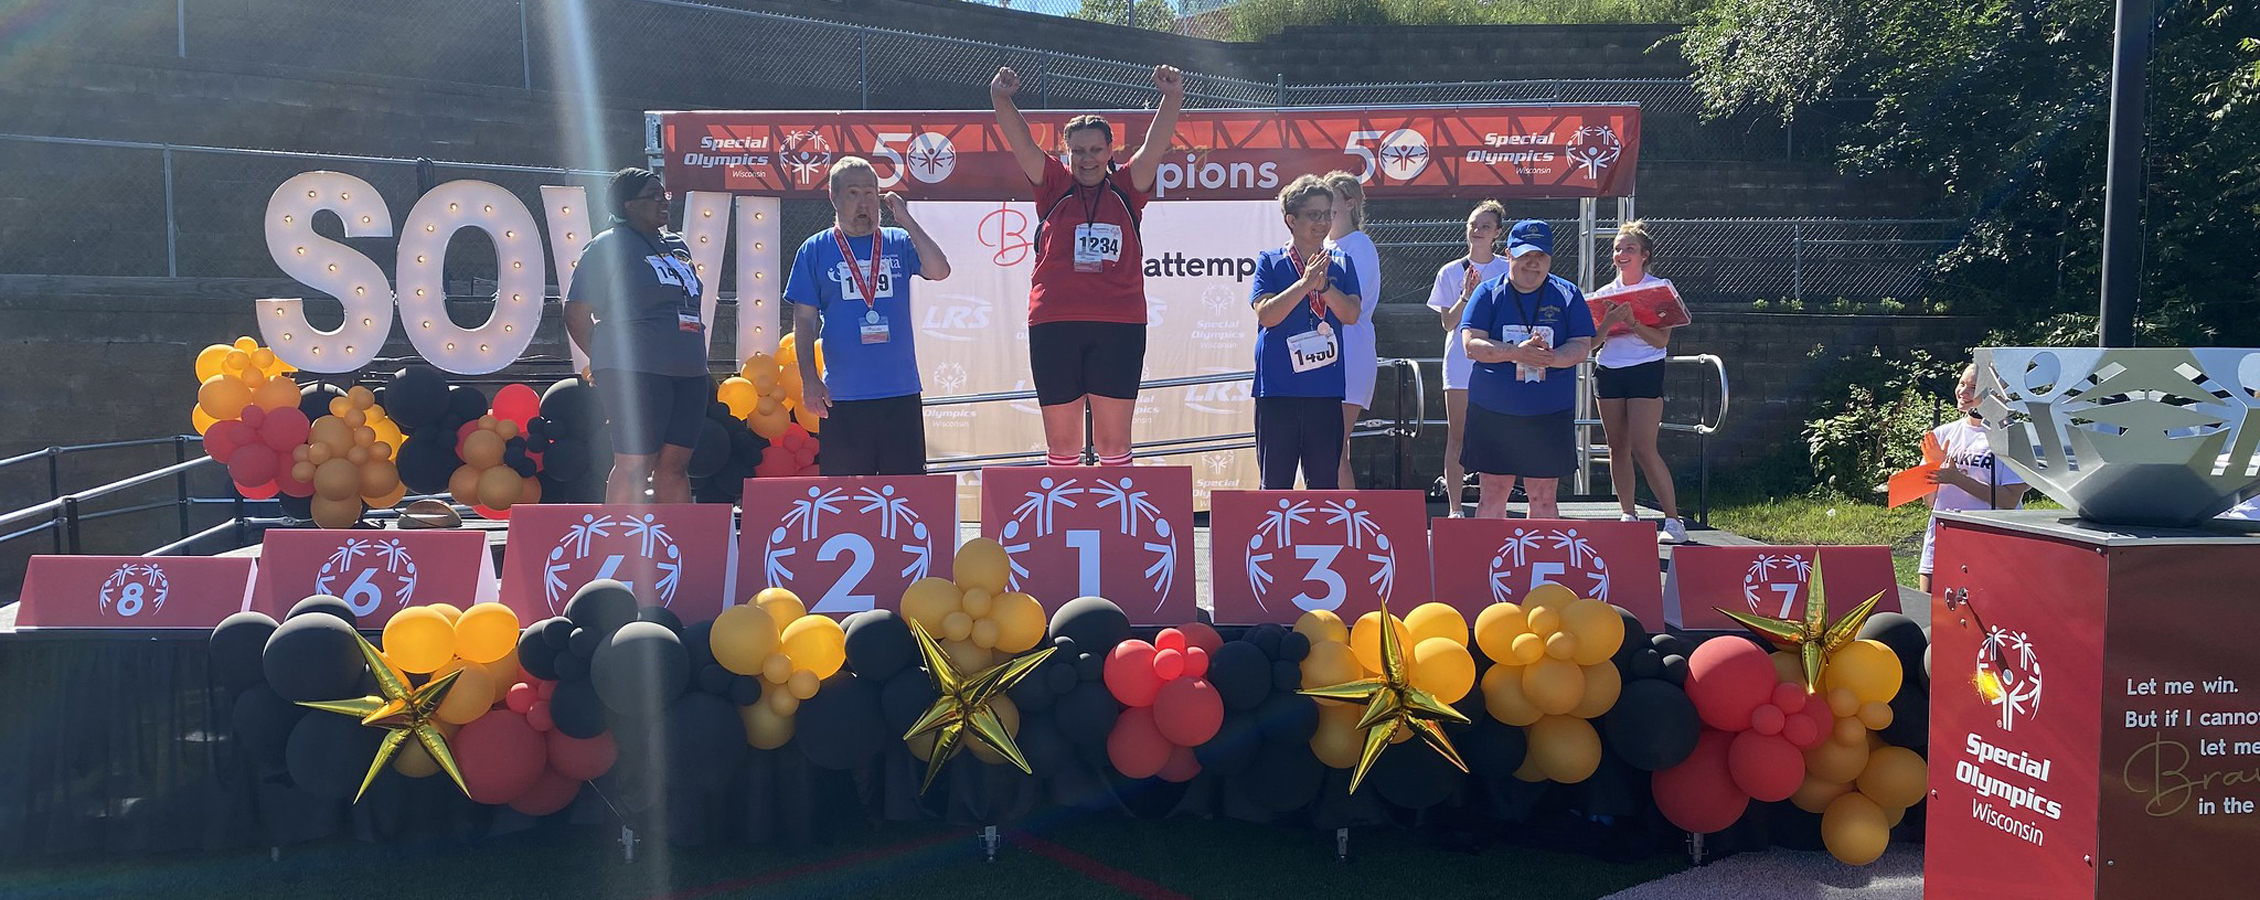 Special Olympics participants stand on a stage and celebrate.